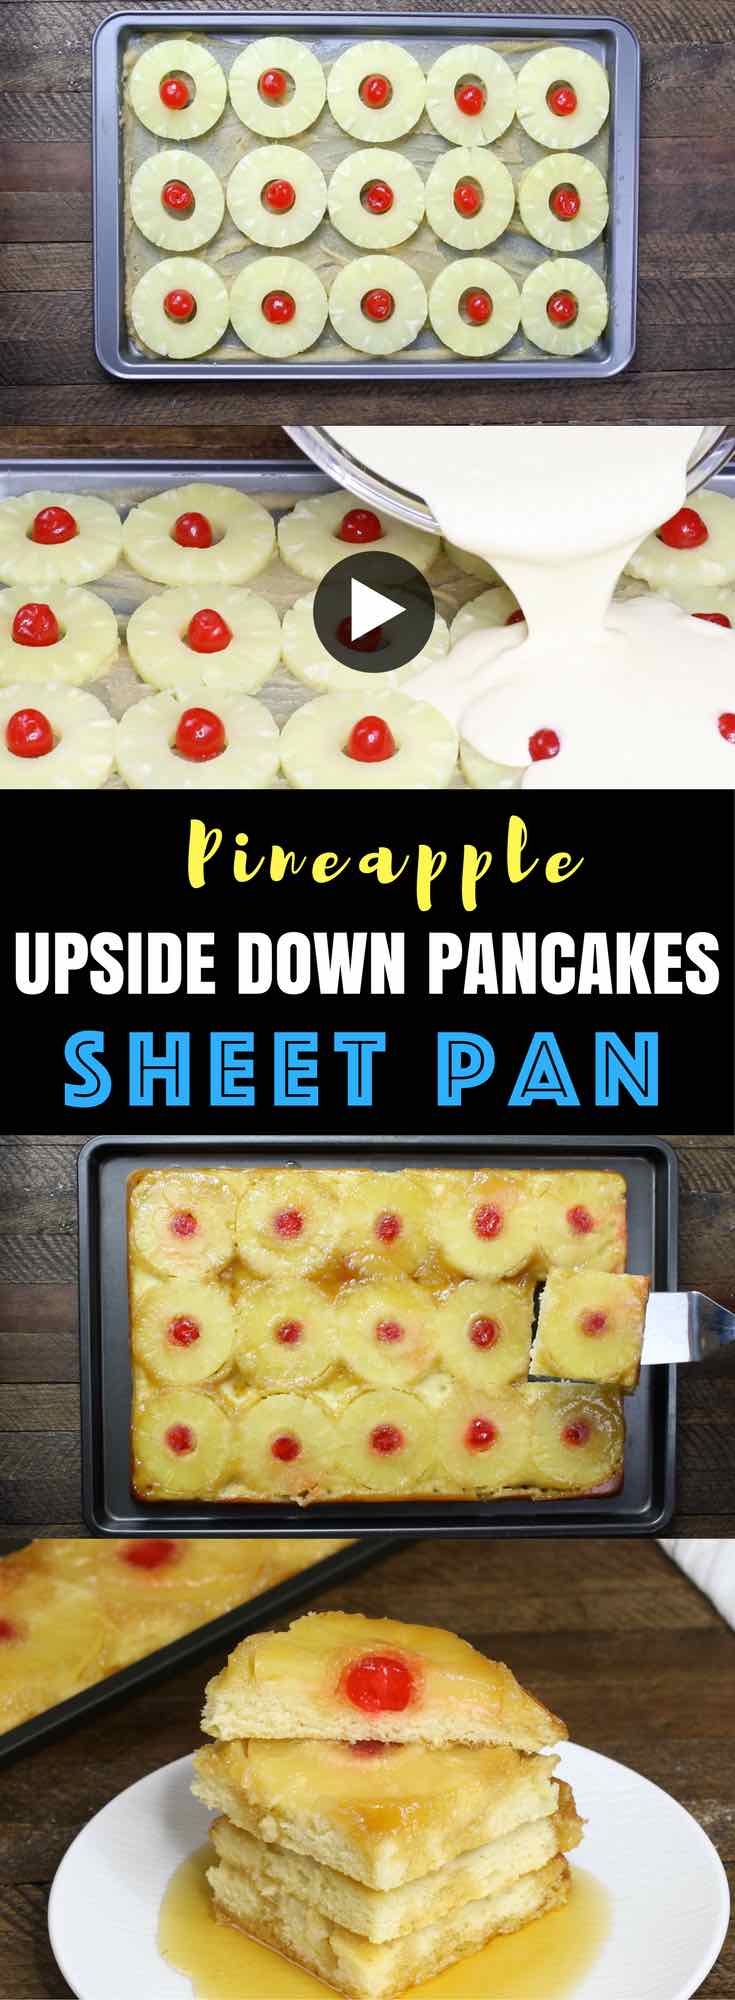 Sheet Pan Pineapple Upside Down Pancakes – combines mouth-watering caramelized sugar, sweet pineapple and cherries on fluffy pancakes! Make it in a sheet pan to save time and feed a crowd for breakfast or brunch (and less mess too!) All you need is some simple recipes: pancake mix, milk, eggs, brown sugar, butter, pineapple and maraschino cherries. So Good! Quick and easy recipe, breakfast and brunch. video recipe. | Tipbuzz.com